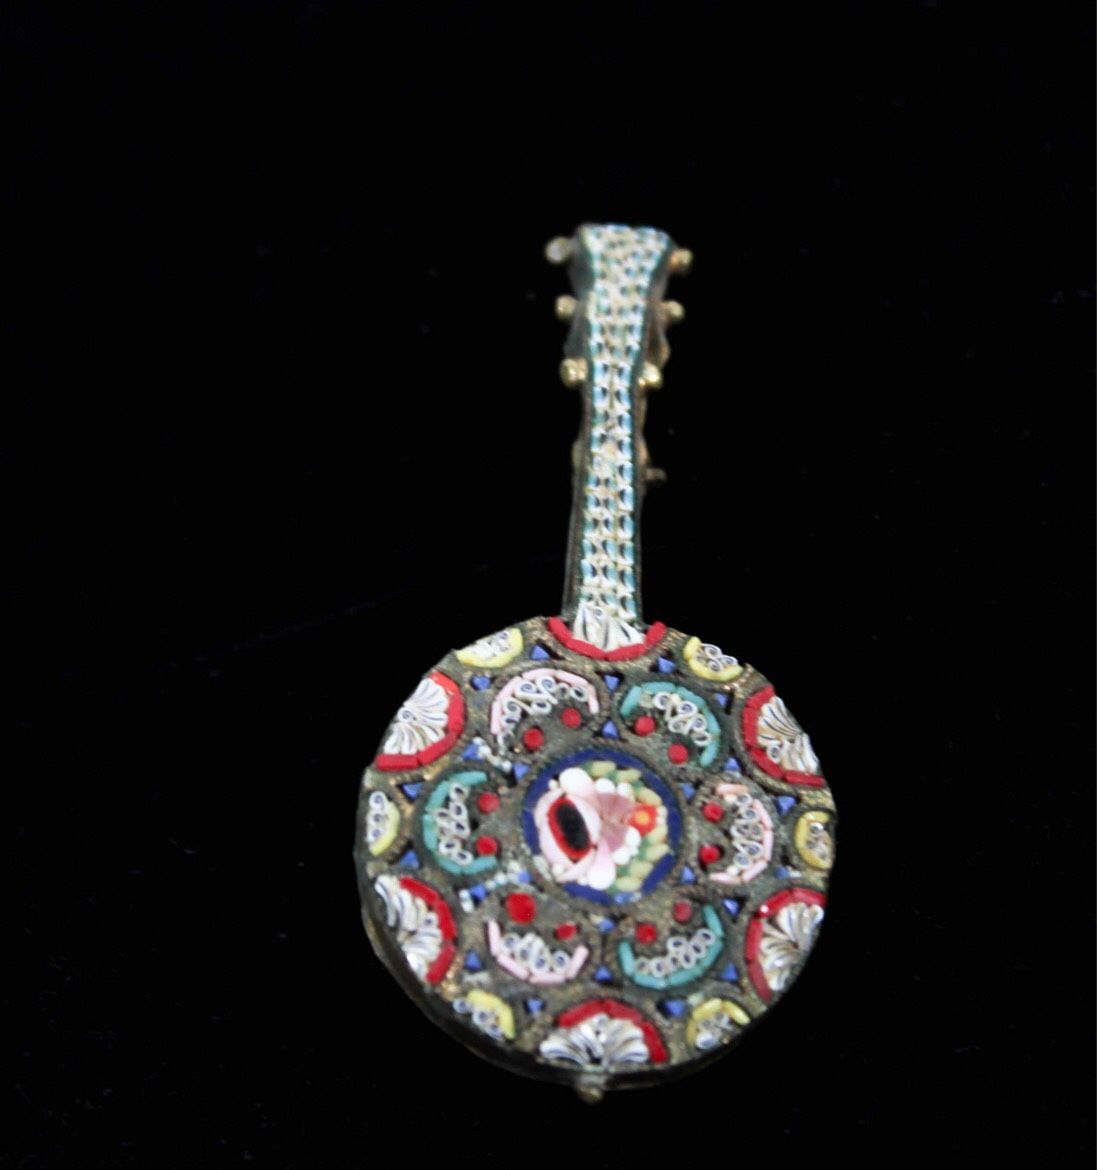 Vintage 1930s 1940s Mosaic Banjo Mediterranean Style Brooch Pin Made In Italy 